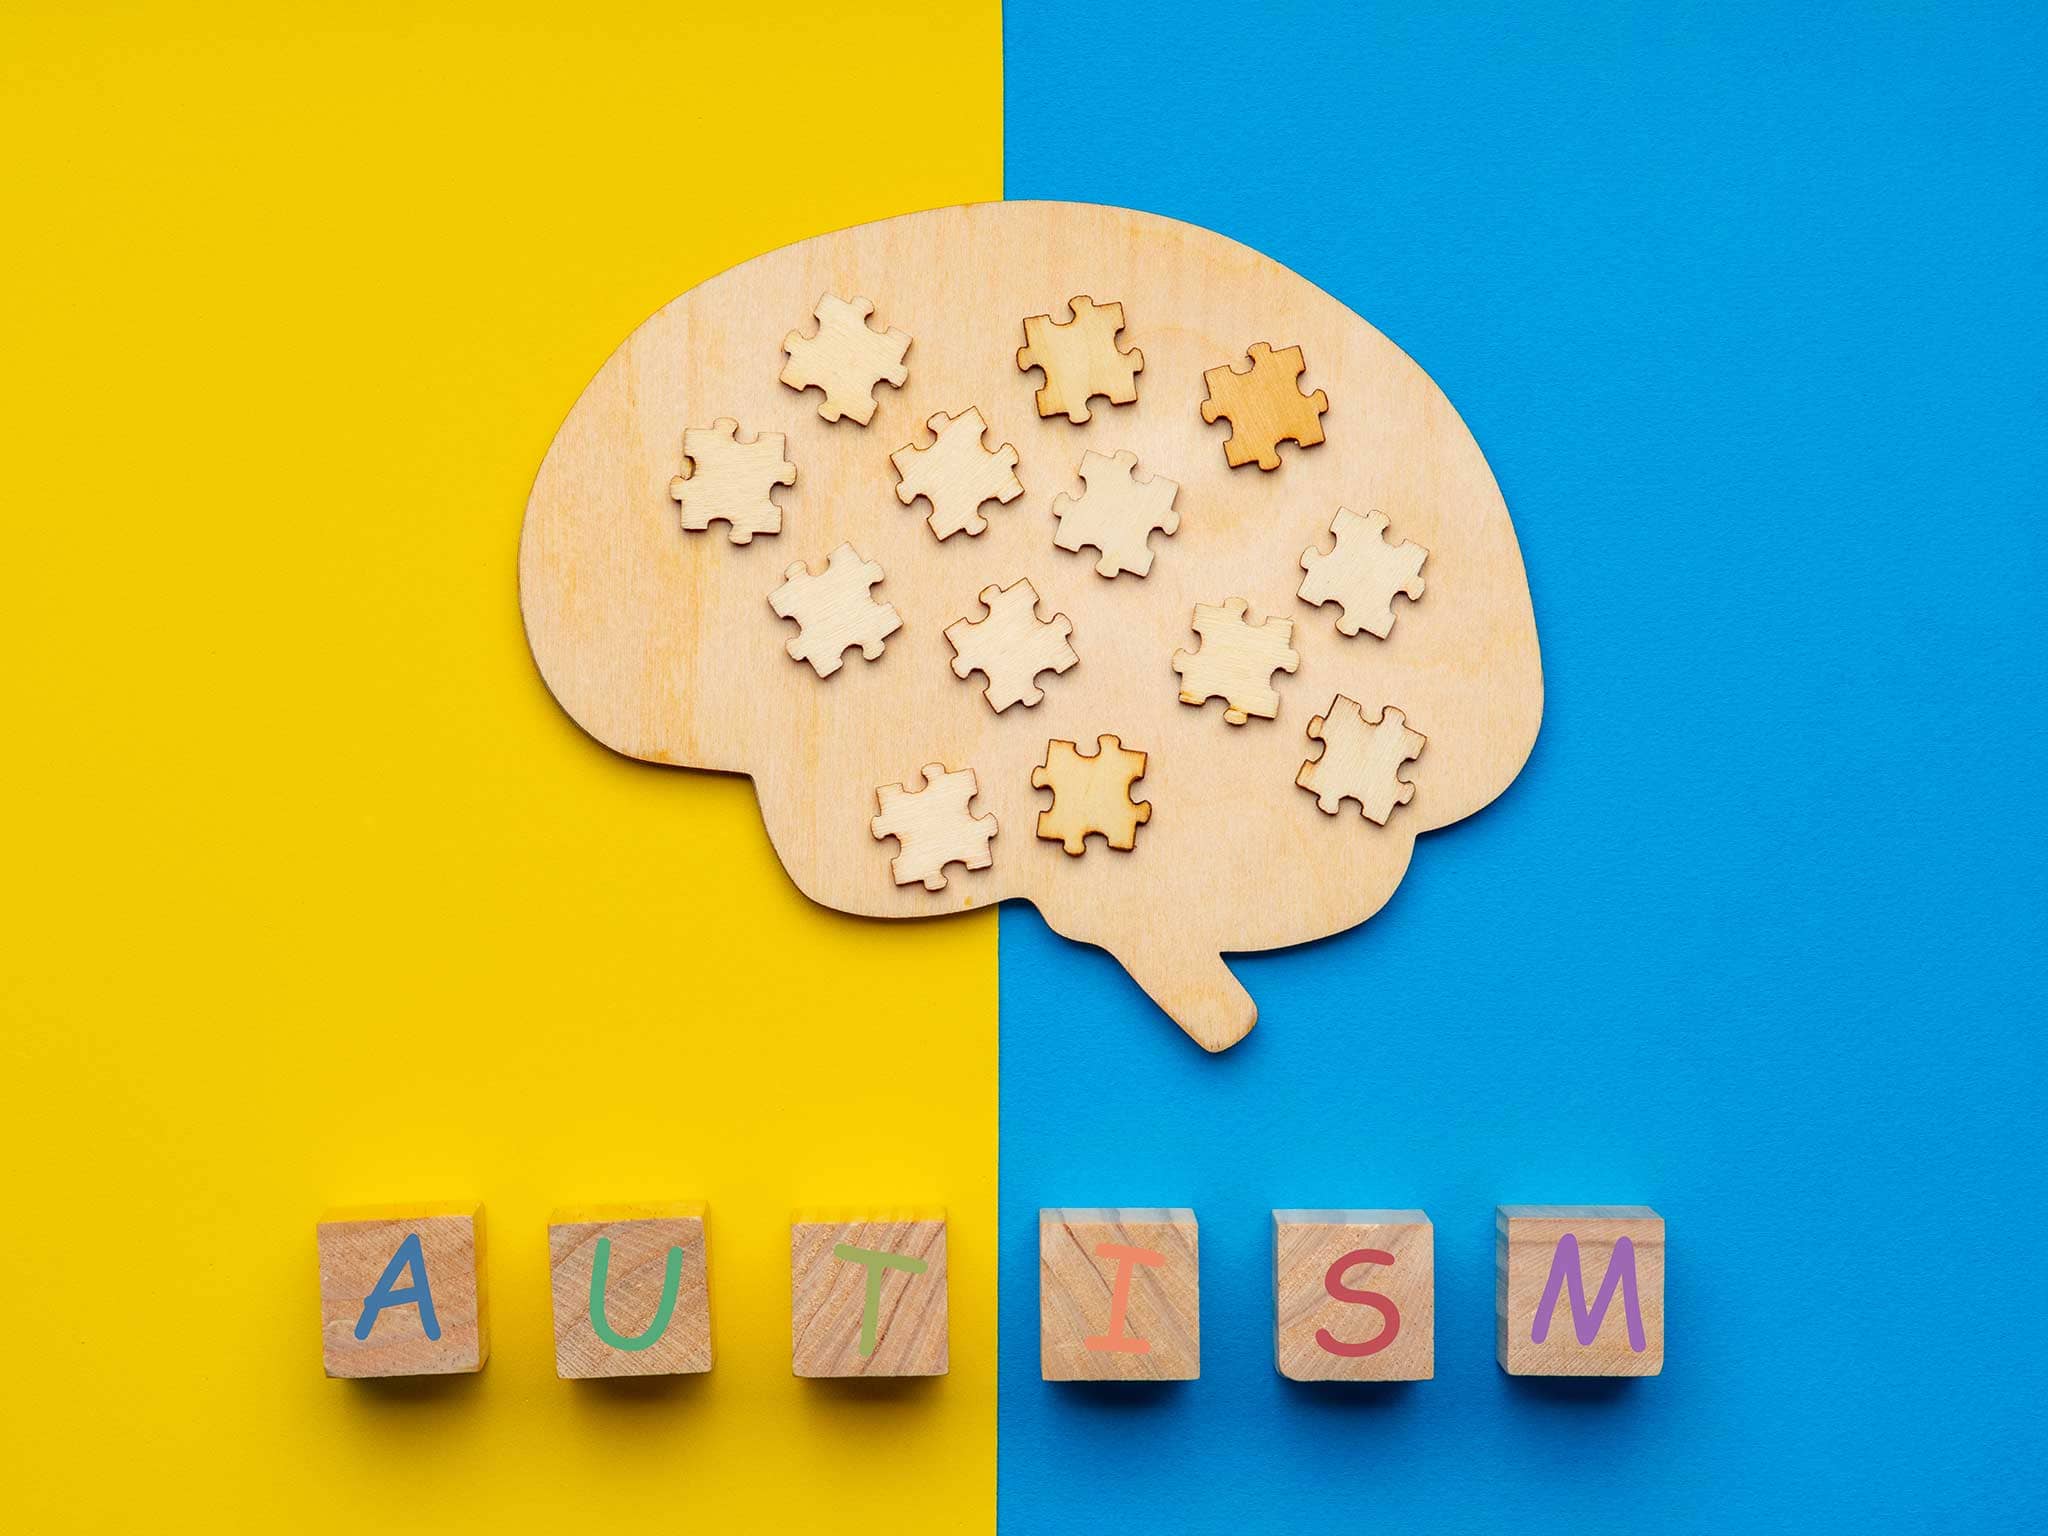 Natural treatment for Autism